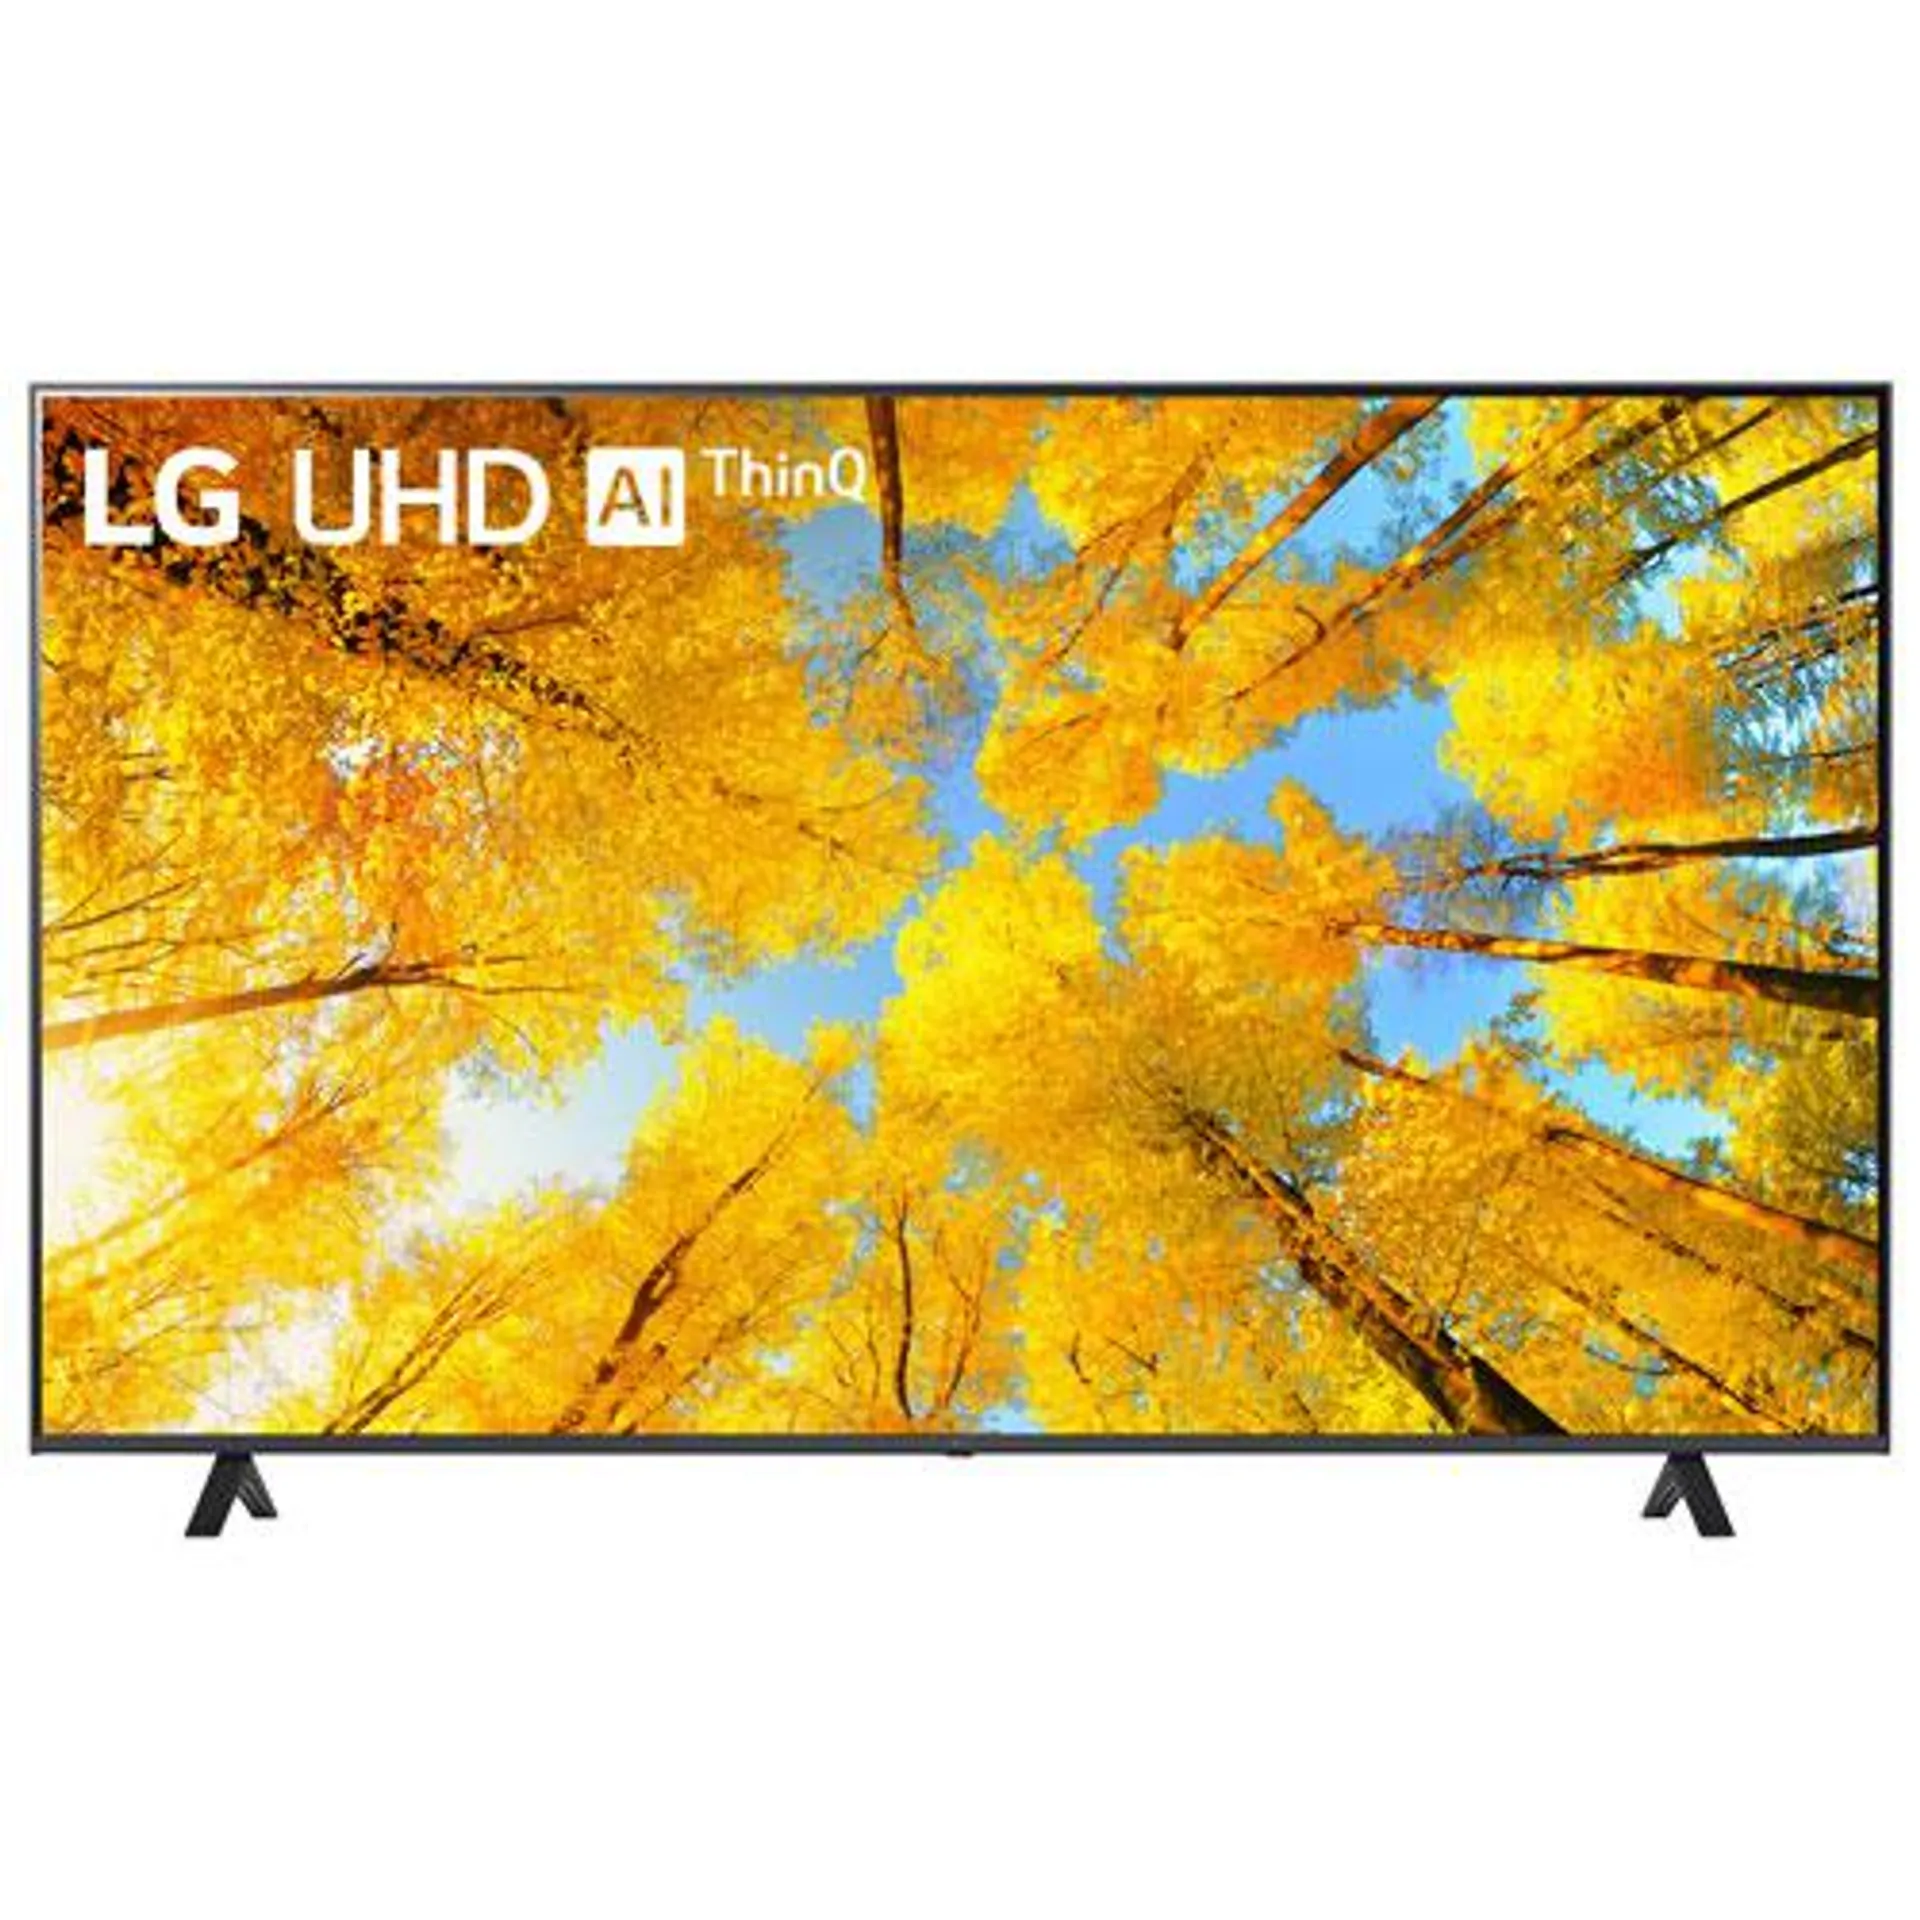 LG 75" 4K UHD HDR LED webOS Smart TV (75UP7300PUC) - 2022 - Dark Grey - Only at Best Buy